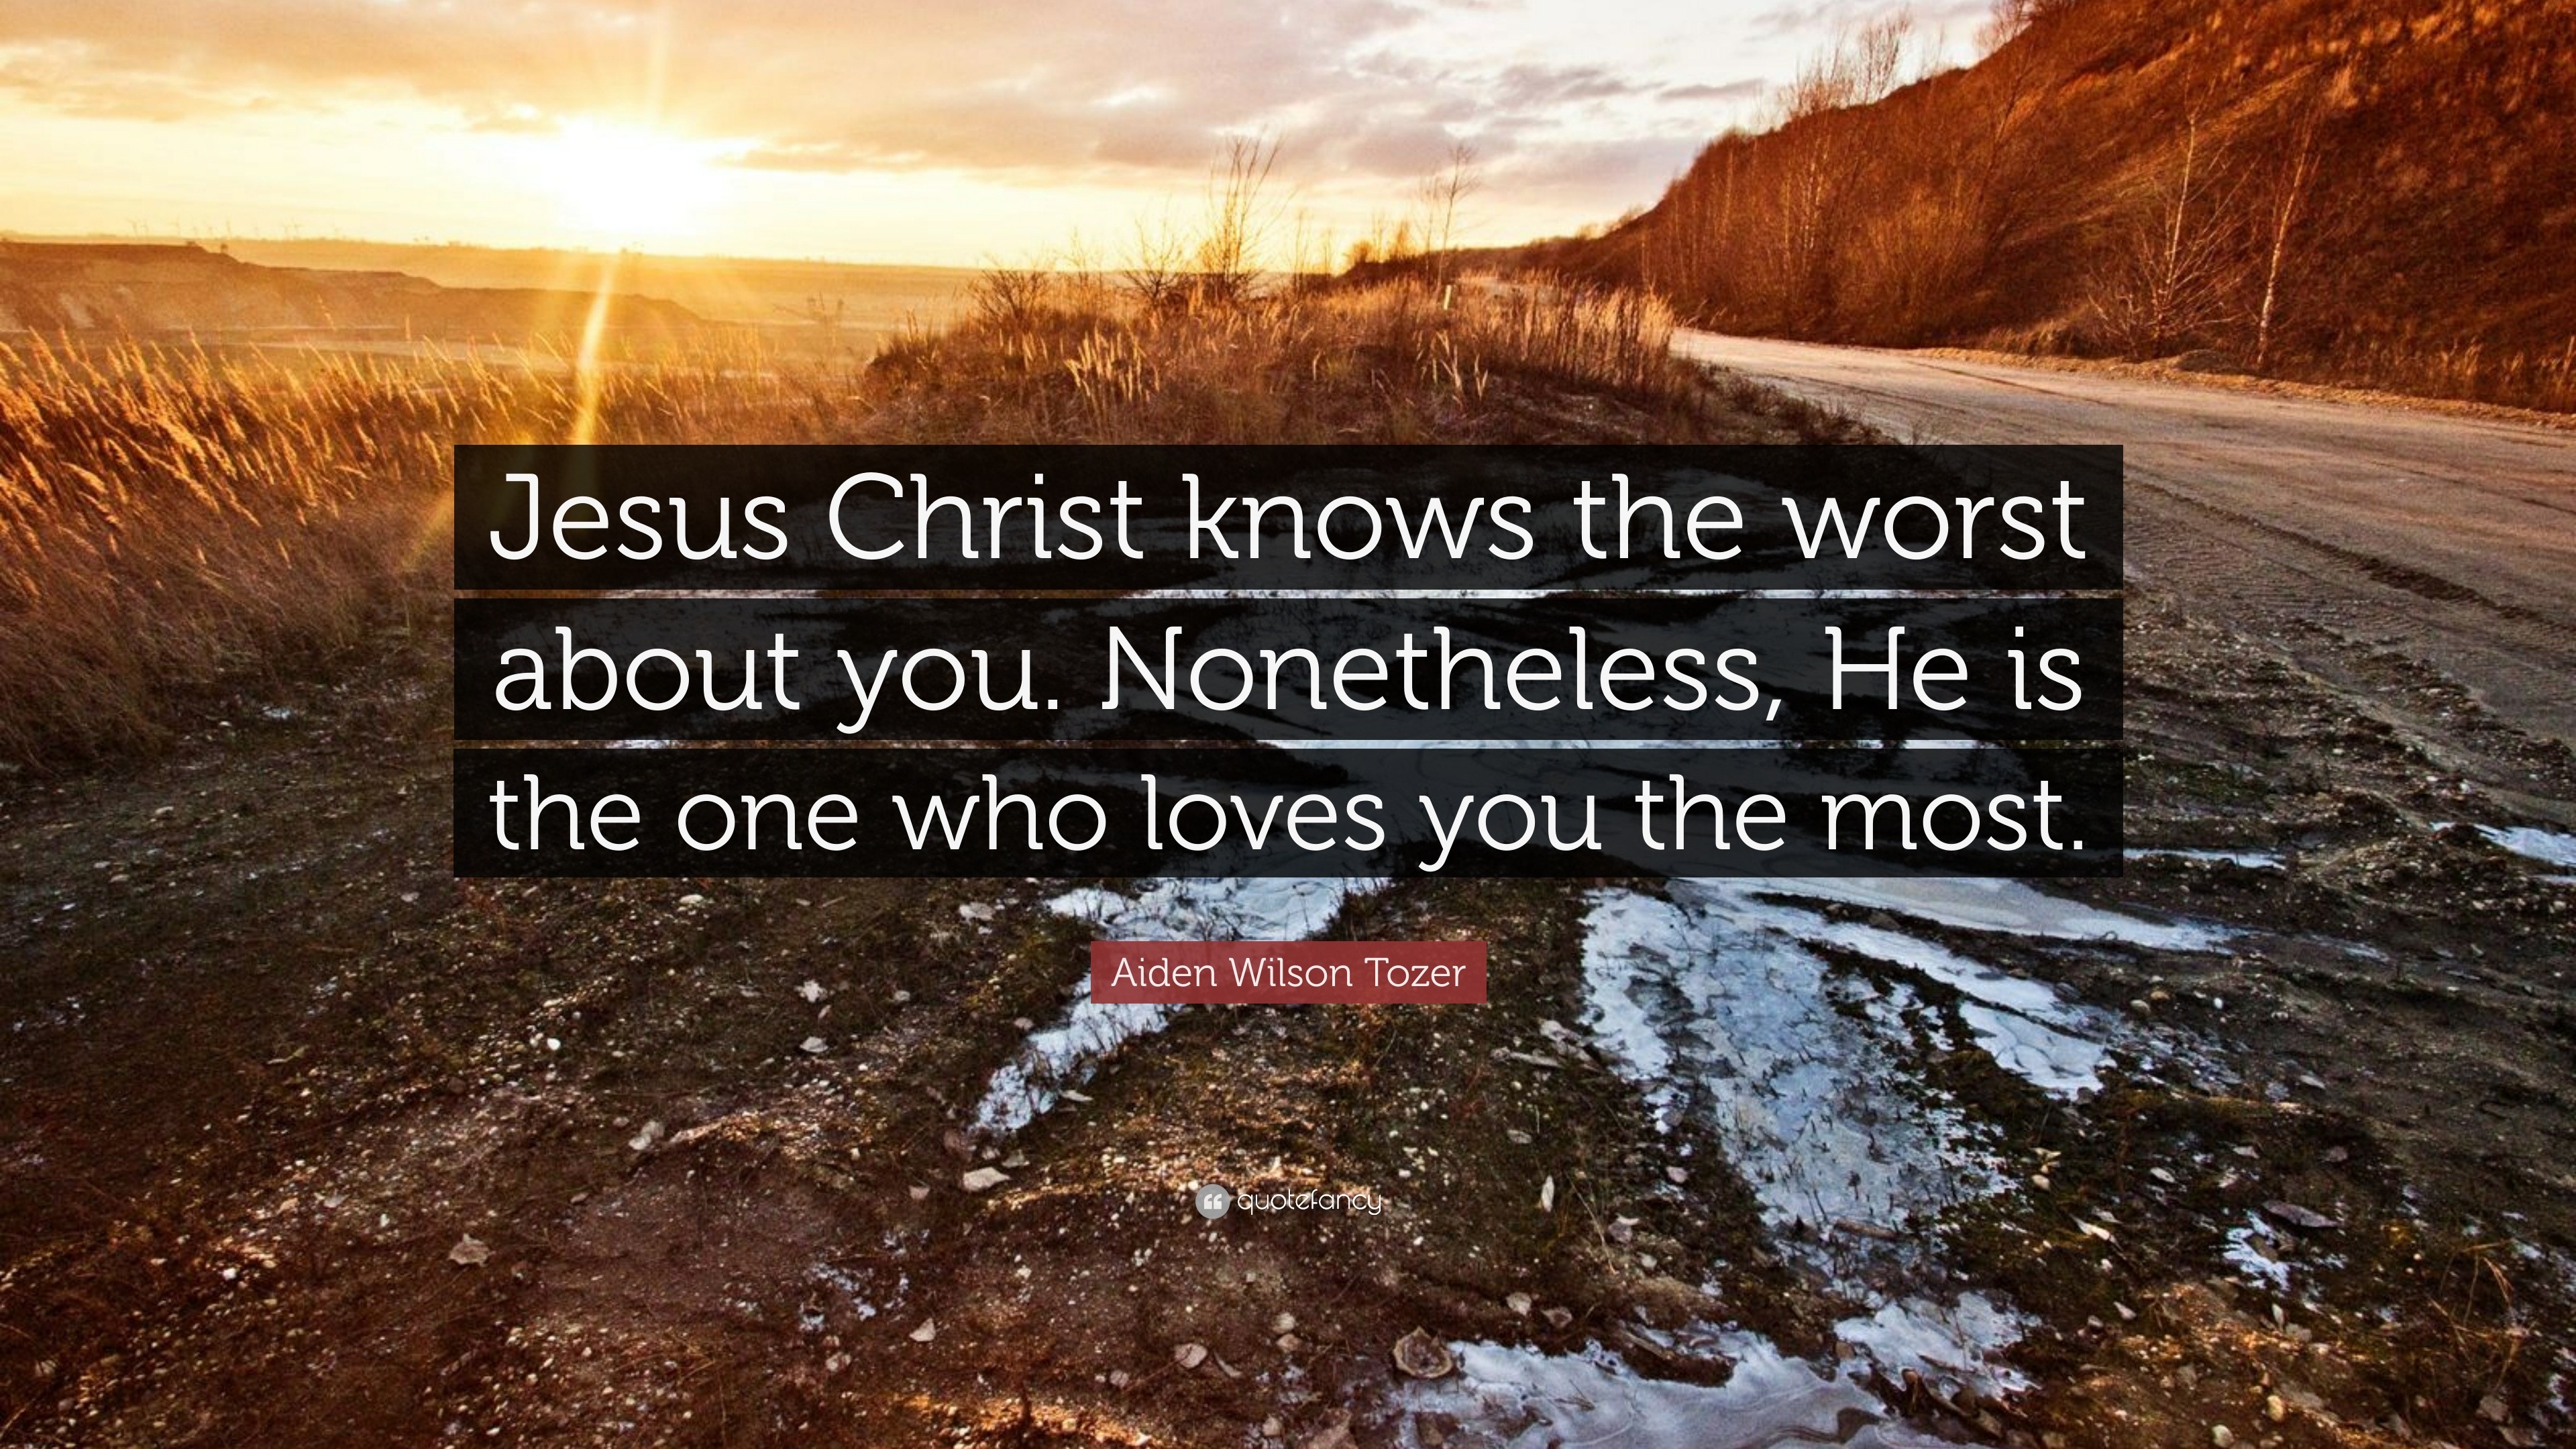 The one who loves you the most